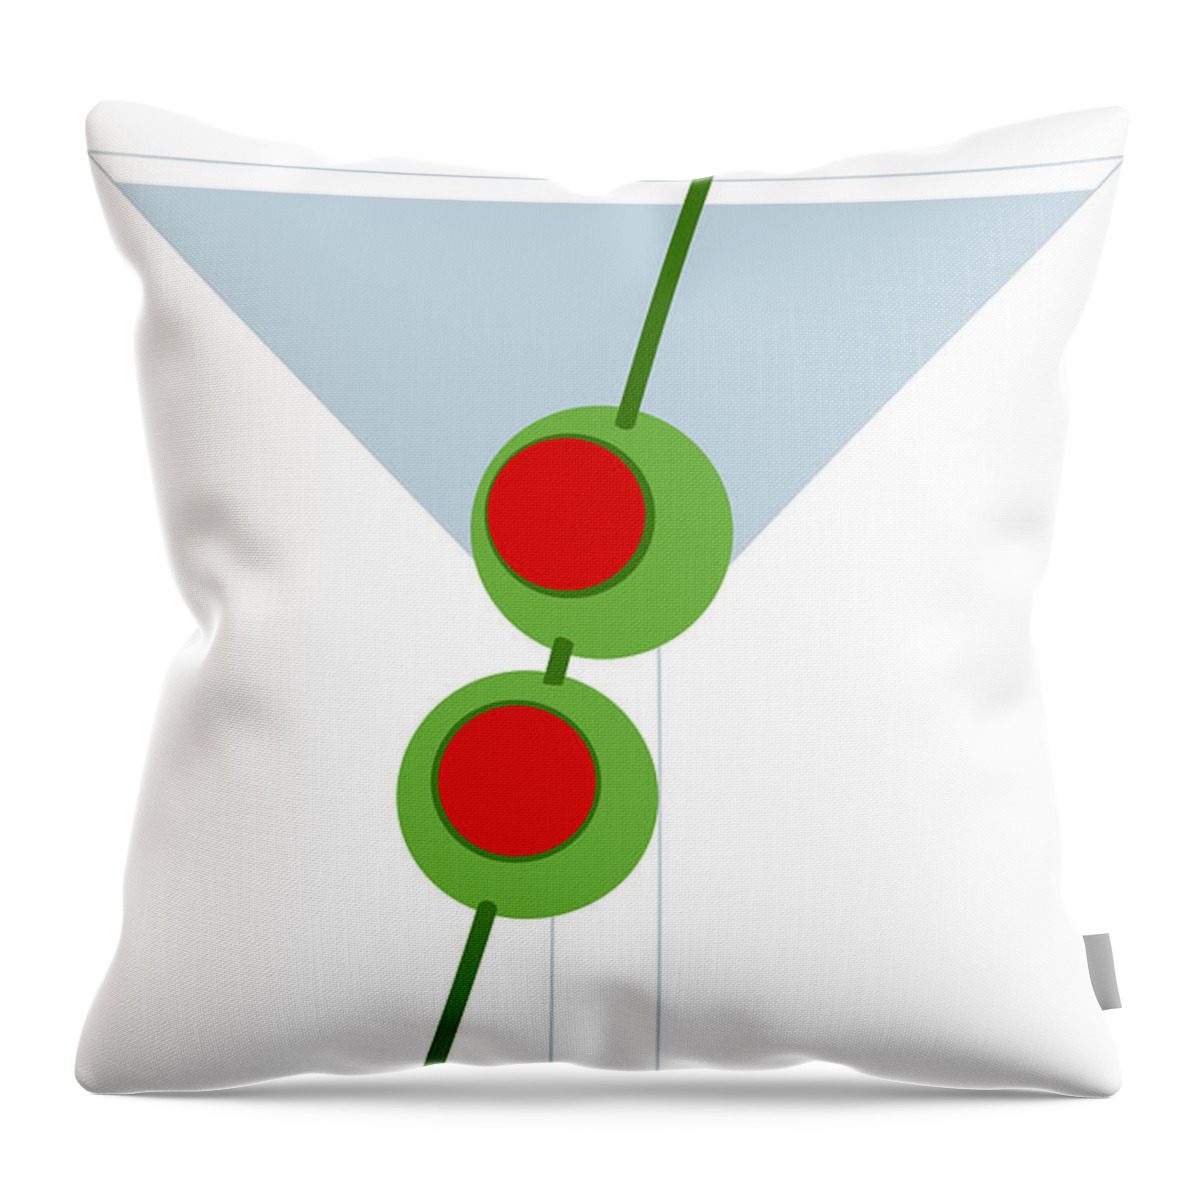 Richard Reeve Throw Pillow featuring the digital art Cocktail Hour by Richard Reeve